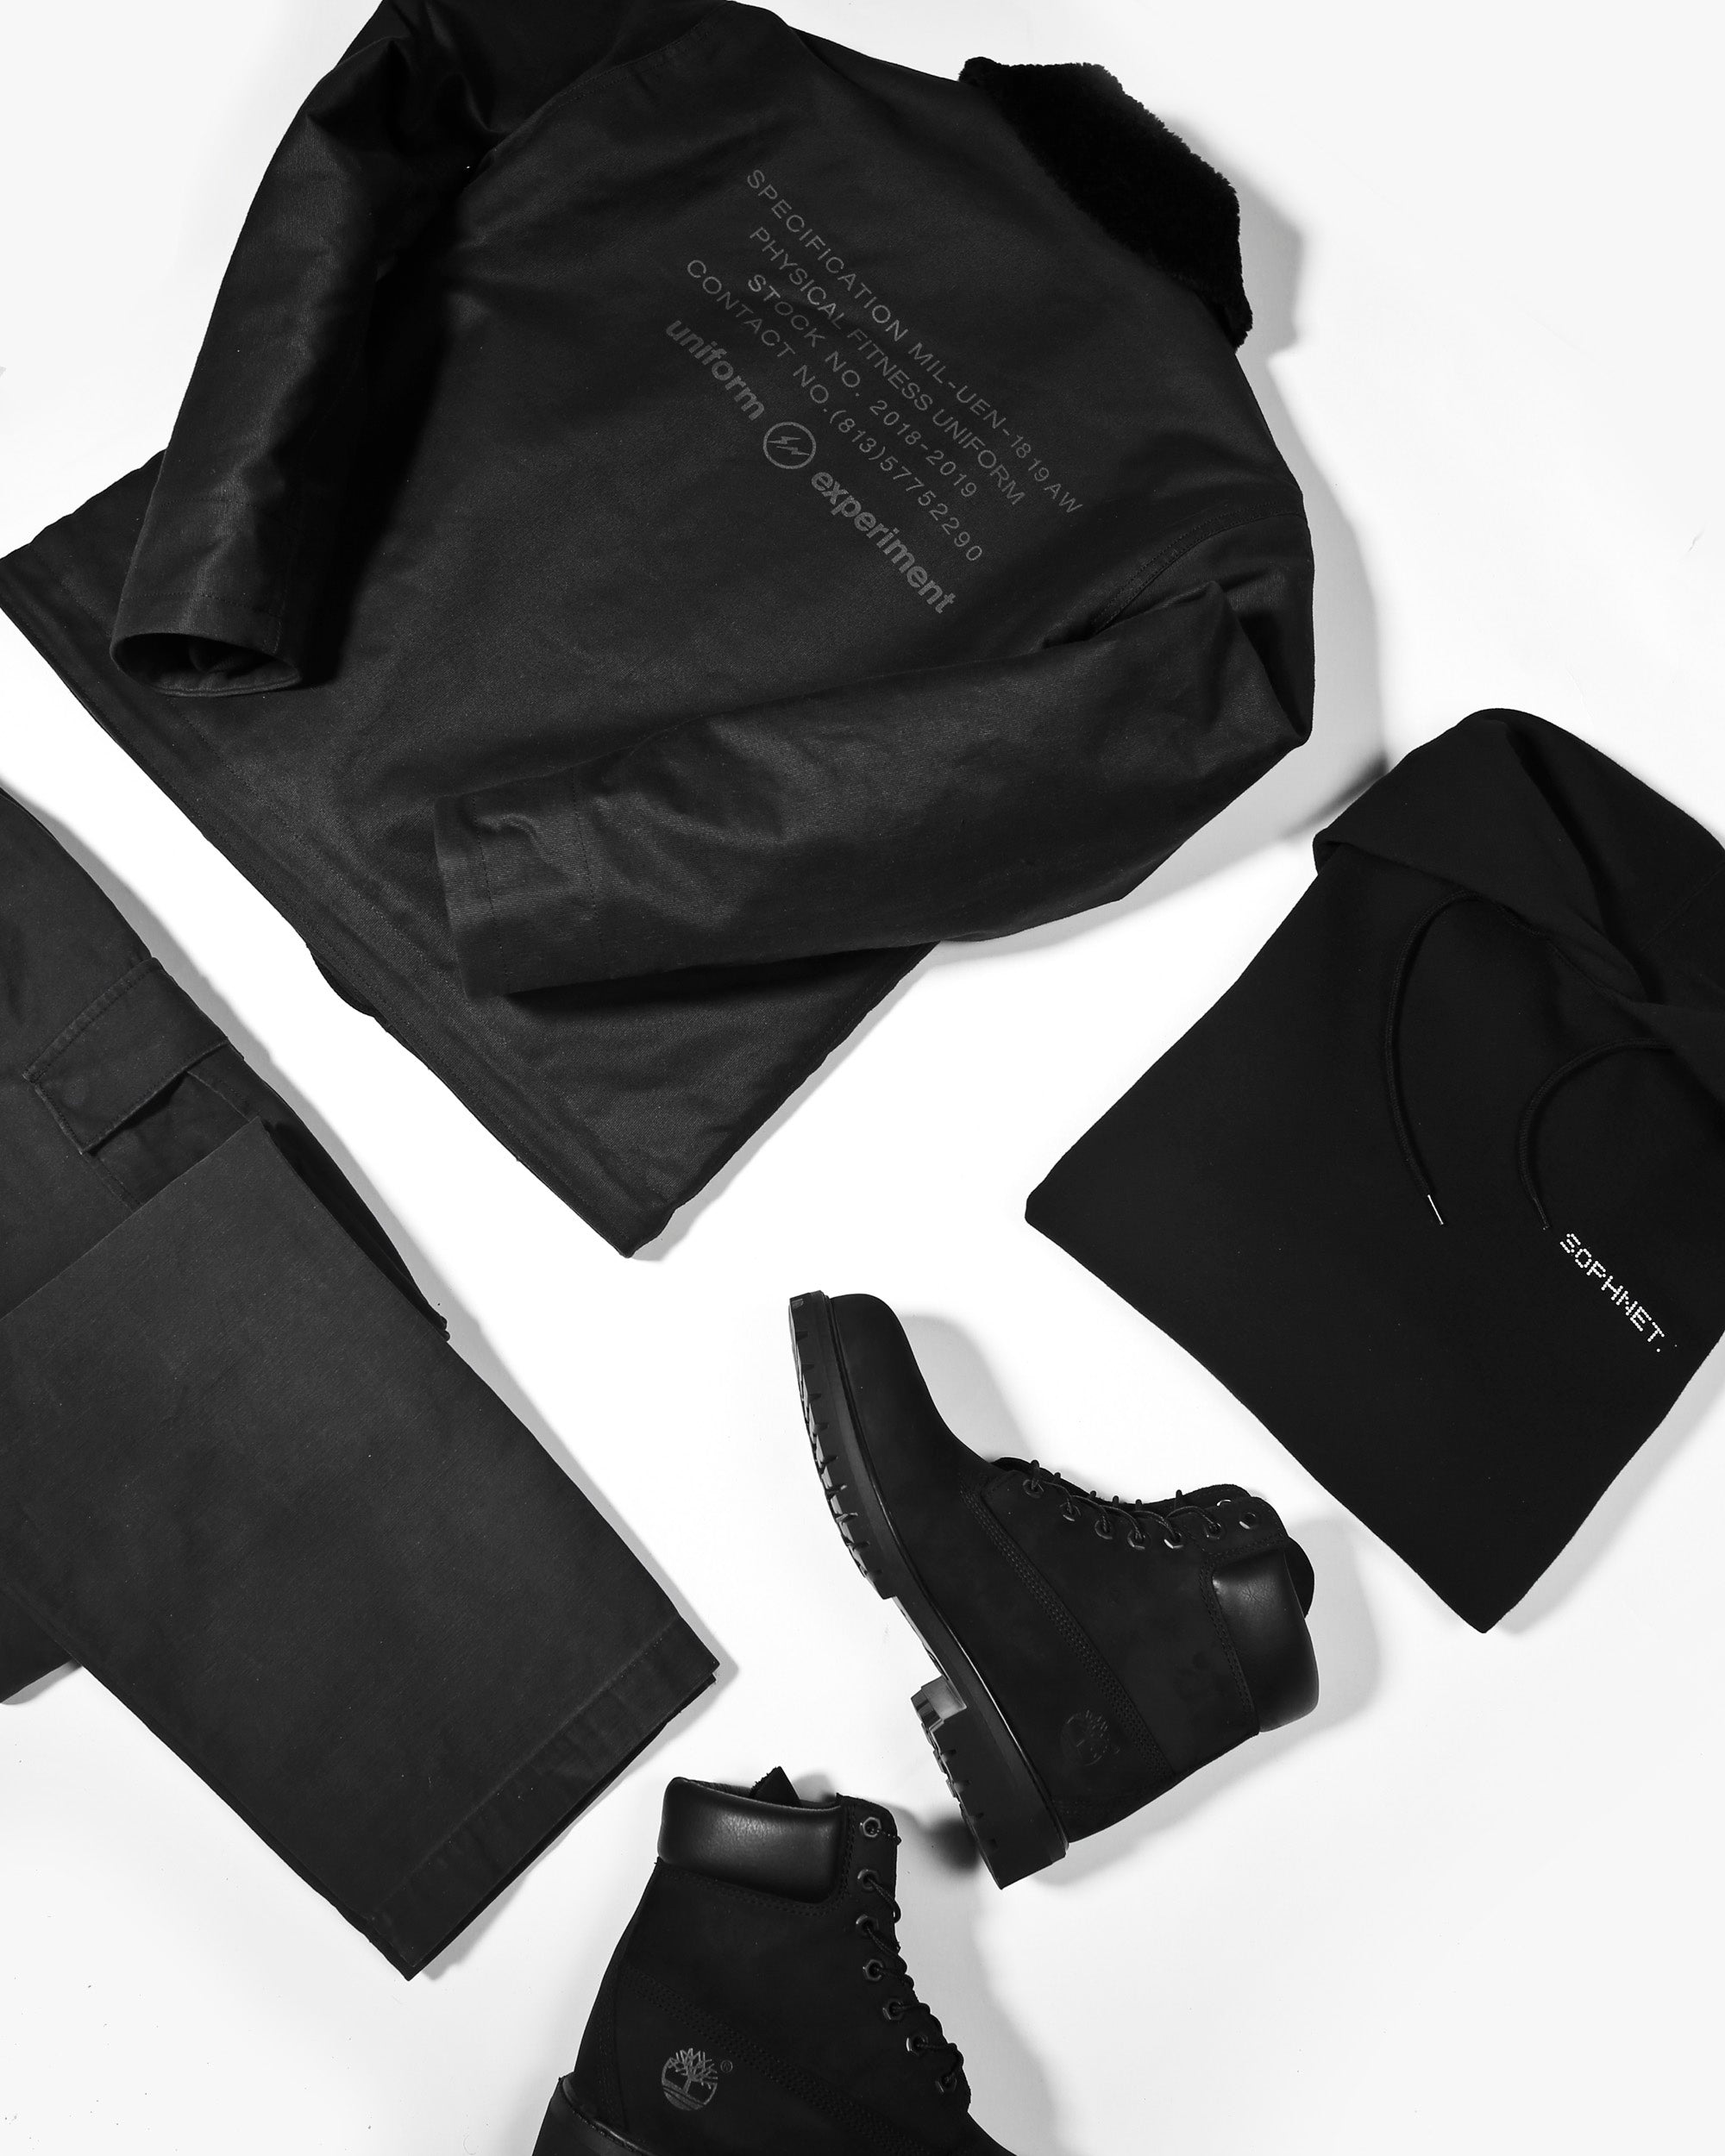 Winter 2018 Necessities - Feat. Sophnet, Stone Island, and lifestyle goods from retaW and CDG and more... card image